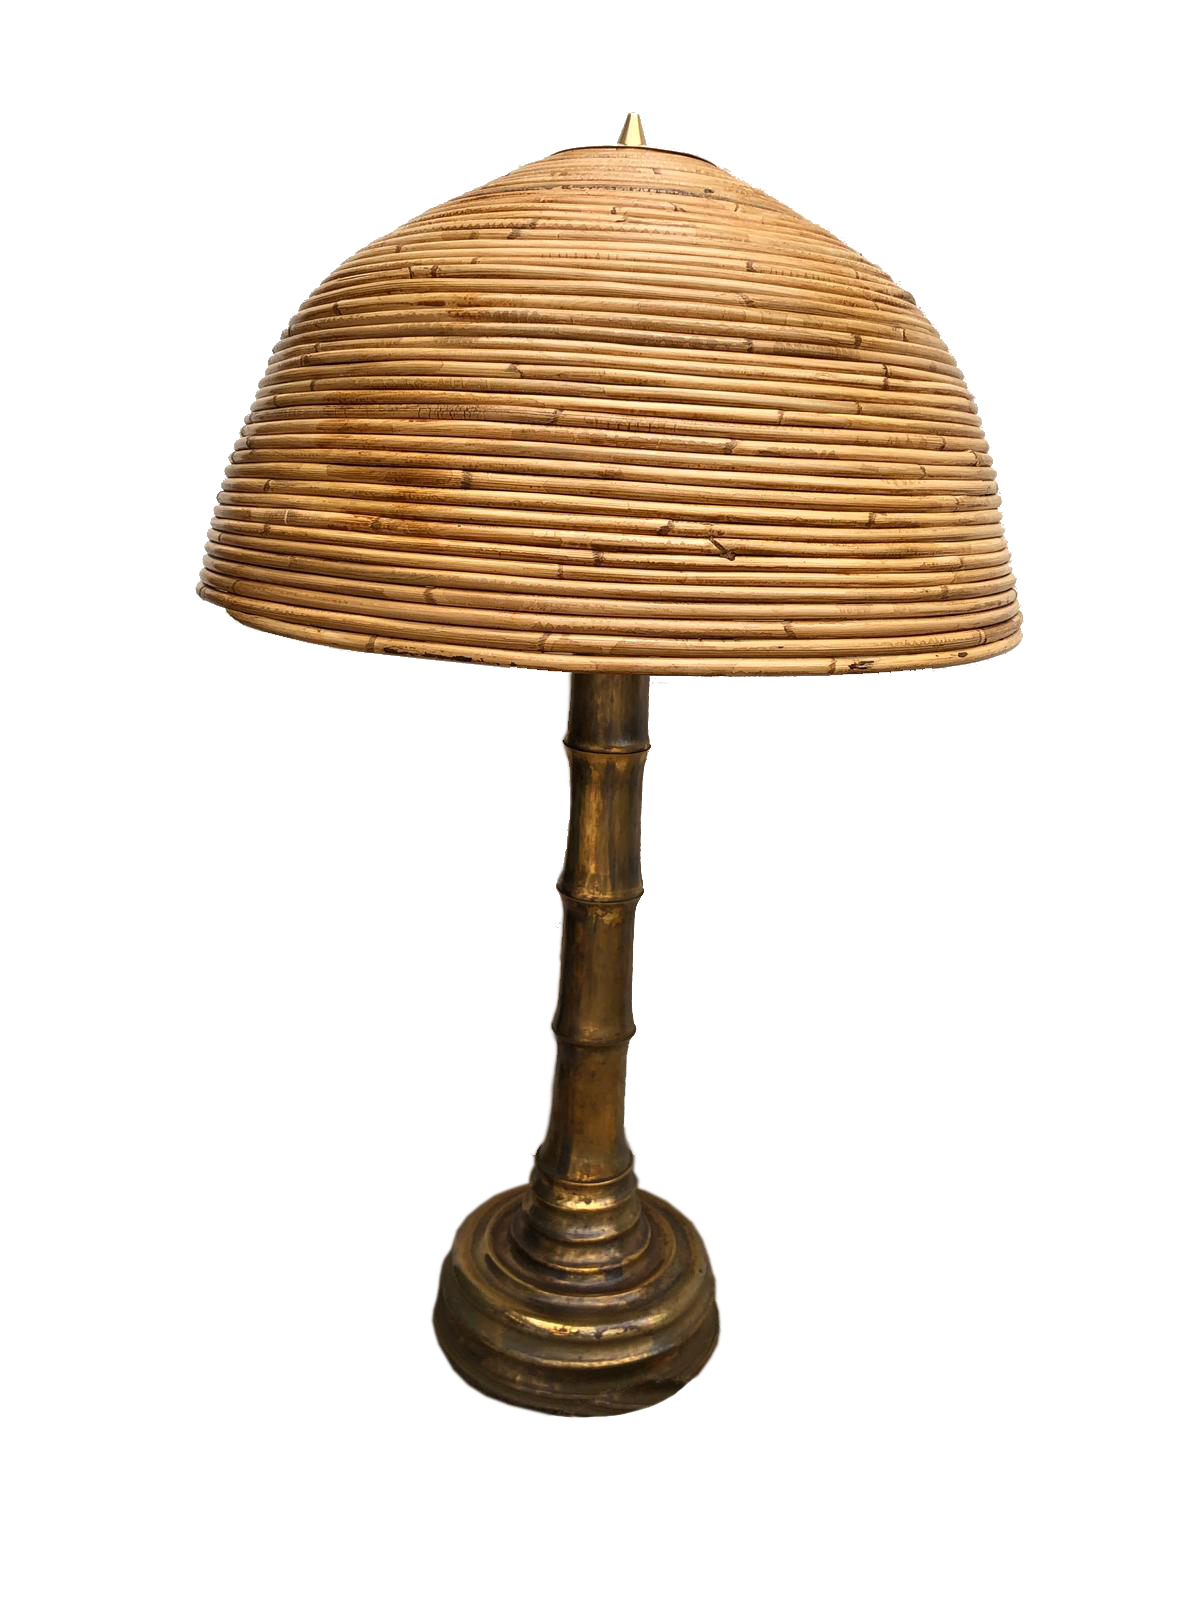 Brass & bamboo table lamp - L'Atelier 55